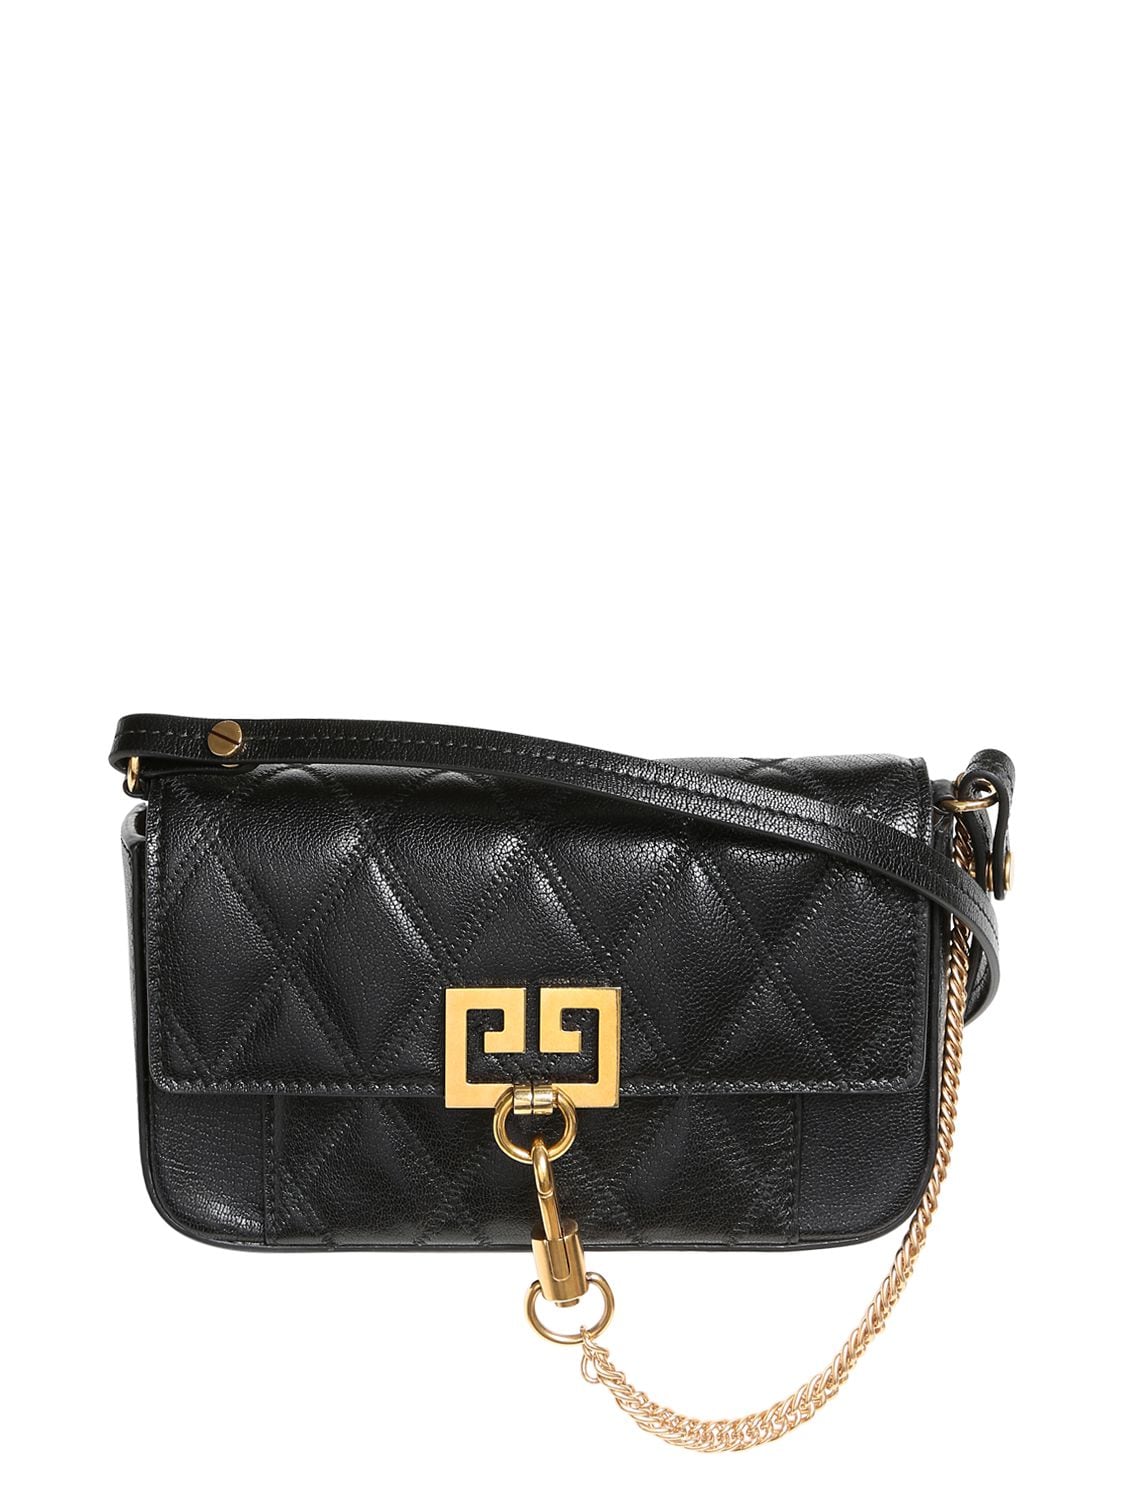 GIVENCHY MINI POCKET QUILTED LEATHER SHOULDER BAG,68ID1A002-MDAX0